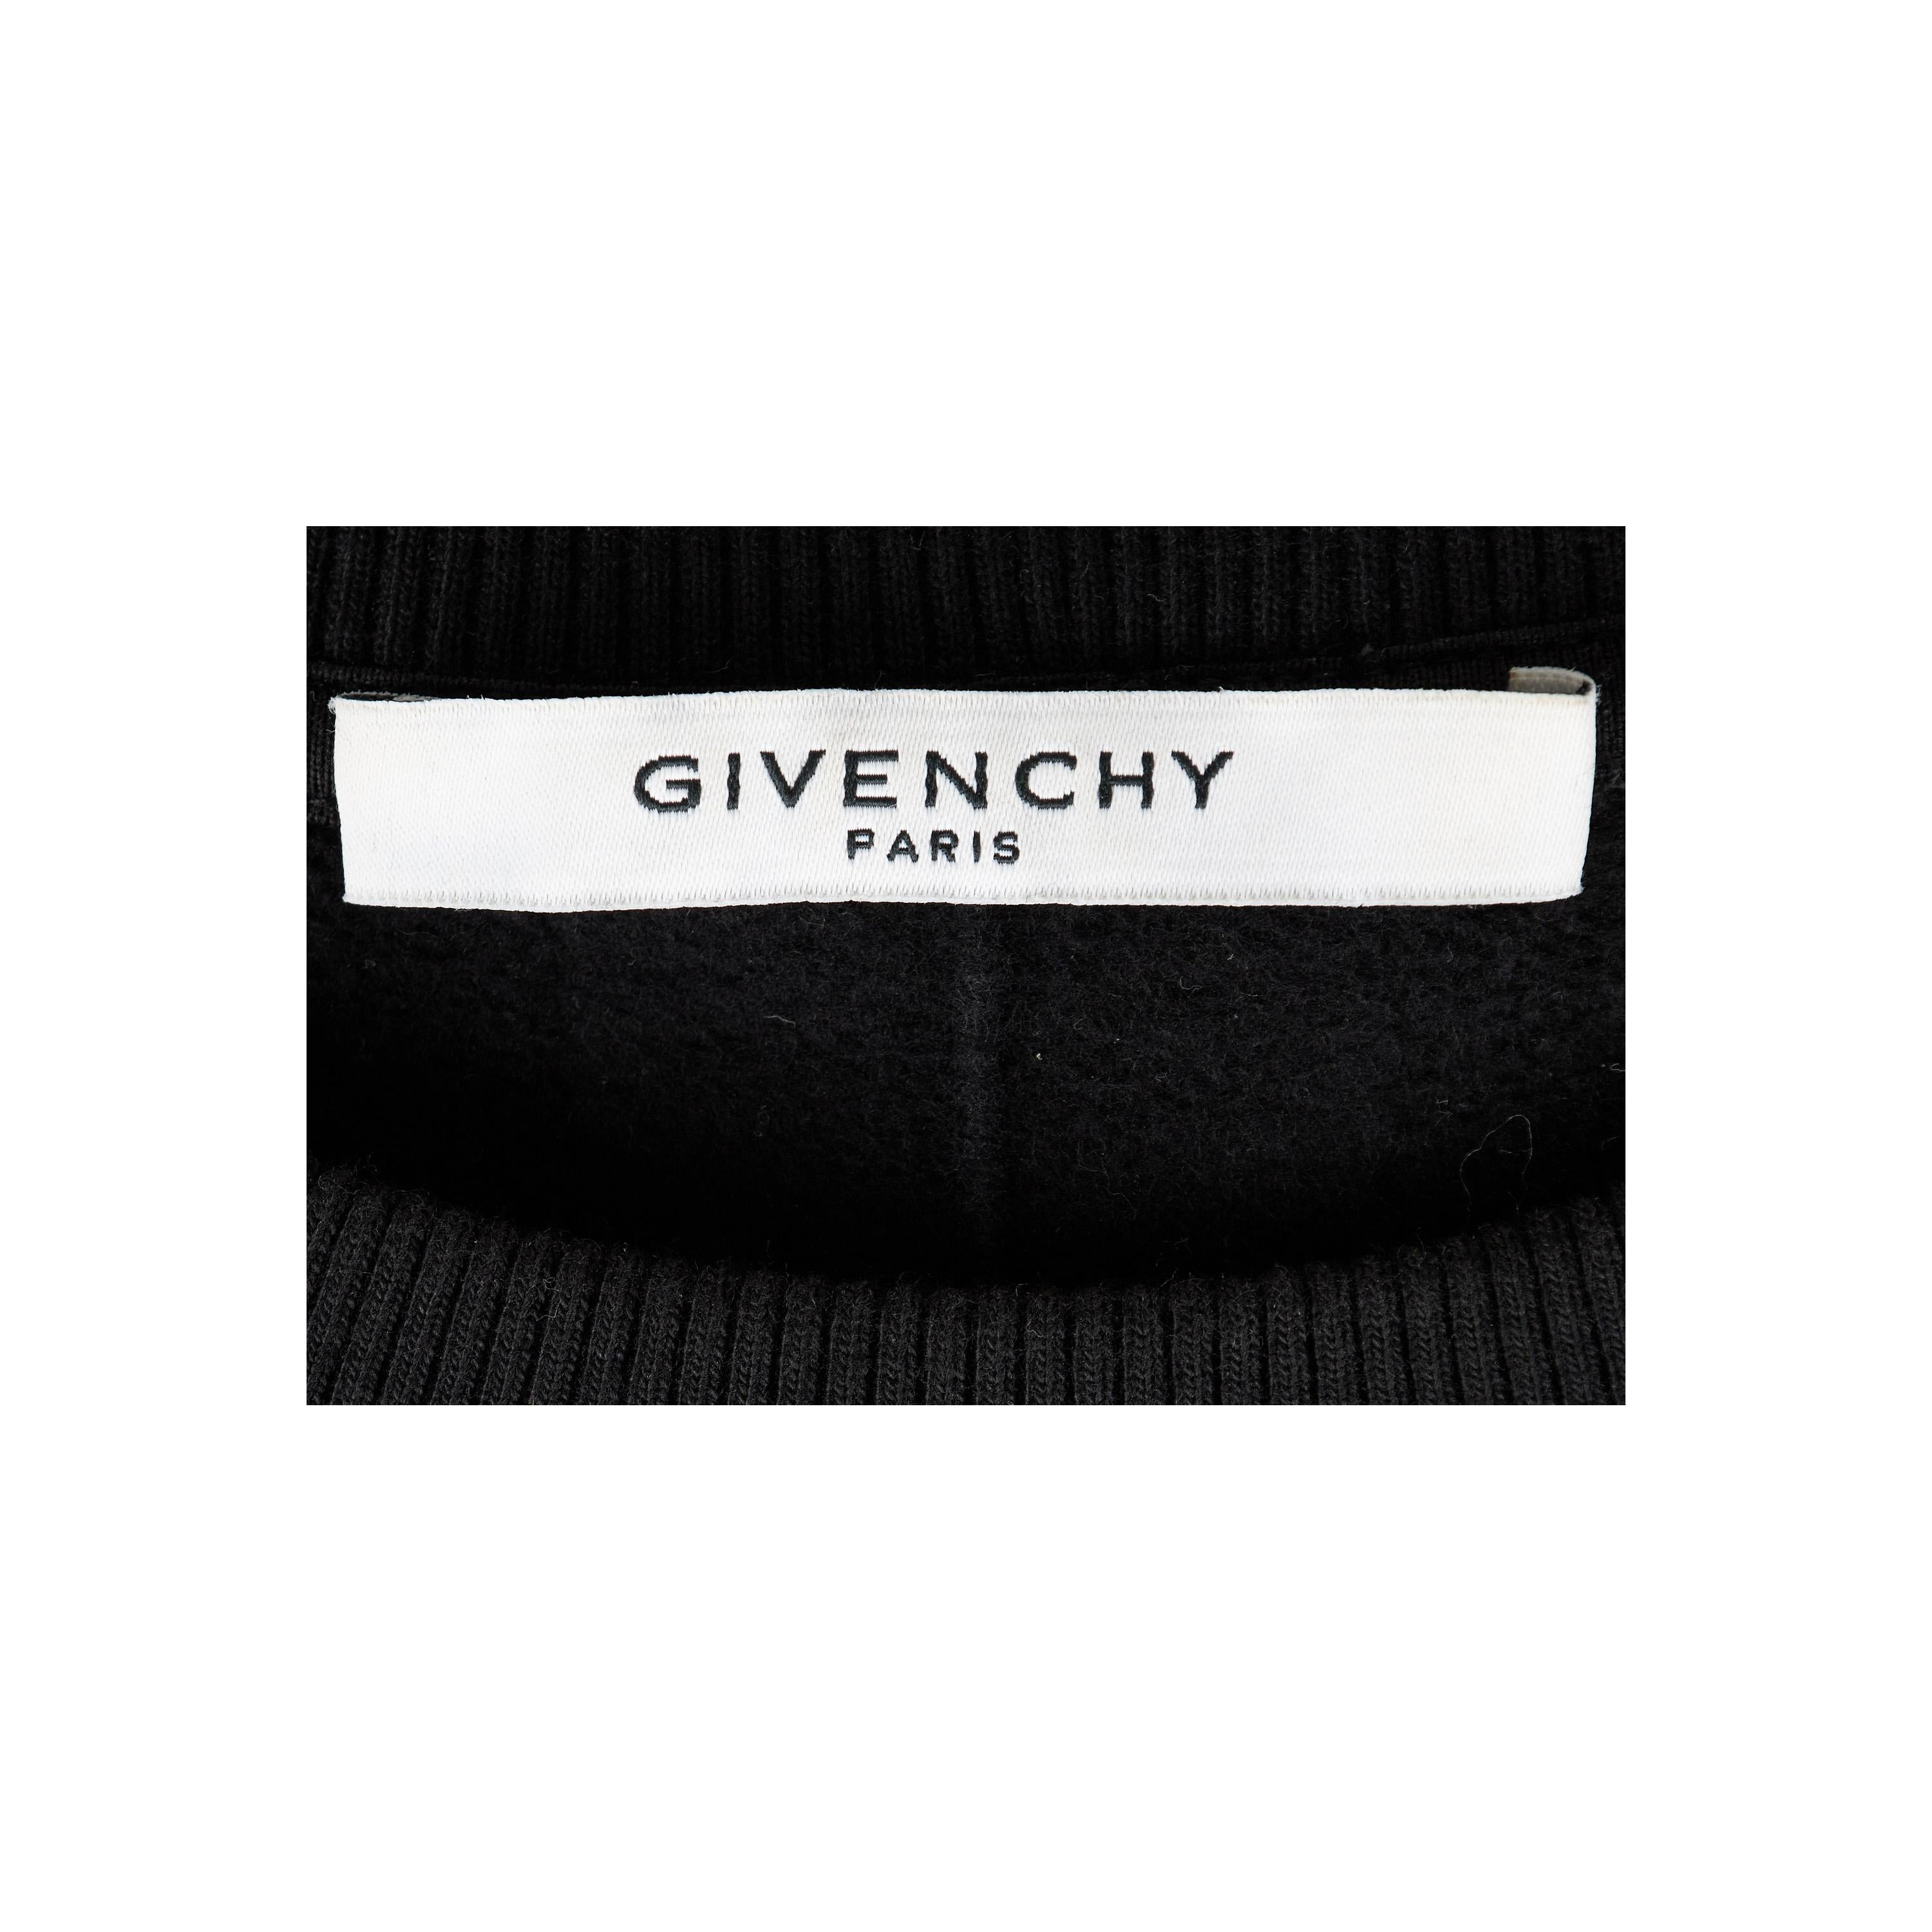 This Givenchy sweater is crafted from cotton for long-lasting comfort. It has a unique silhouette featuring an oversized fit, round neck, long sleeves, and ribbed cuffs and hem. The white patch detail adds a unique twist to the minimalist design. 